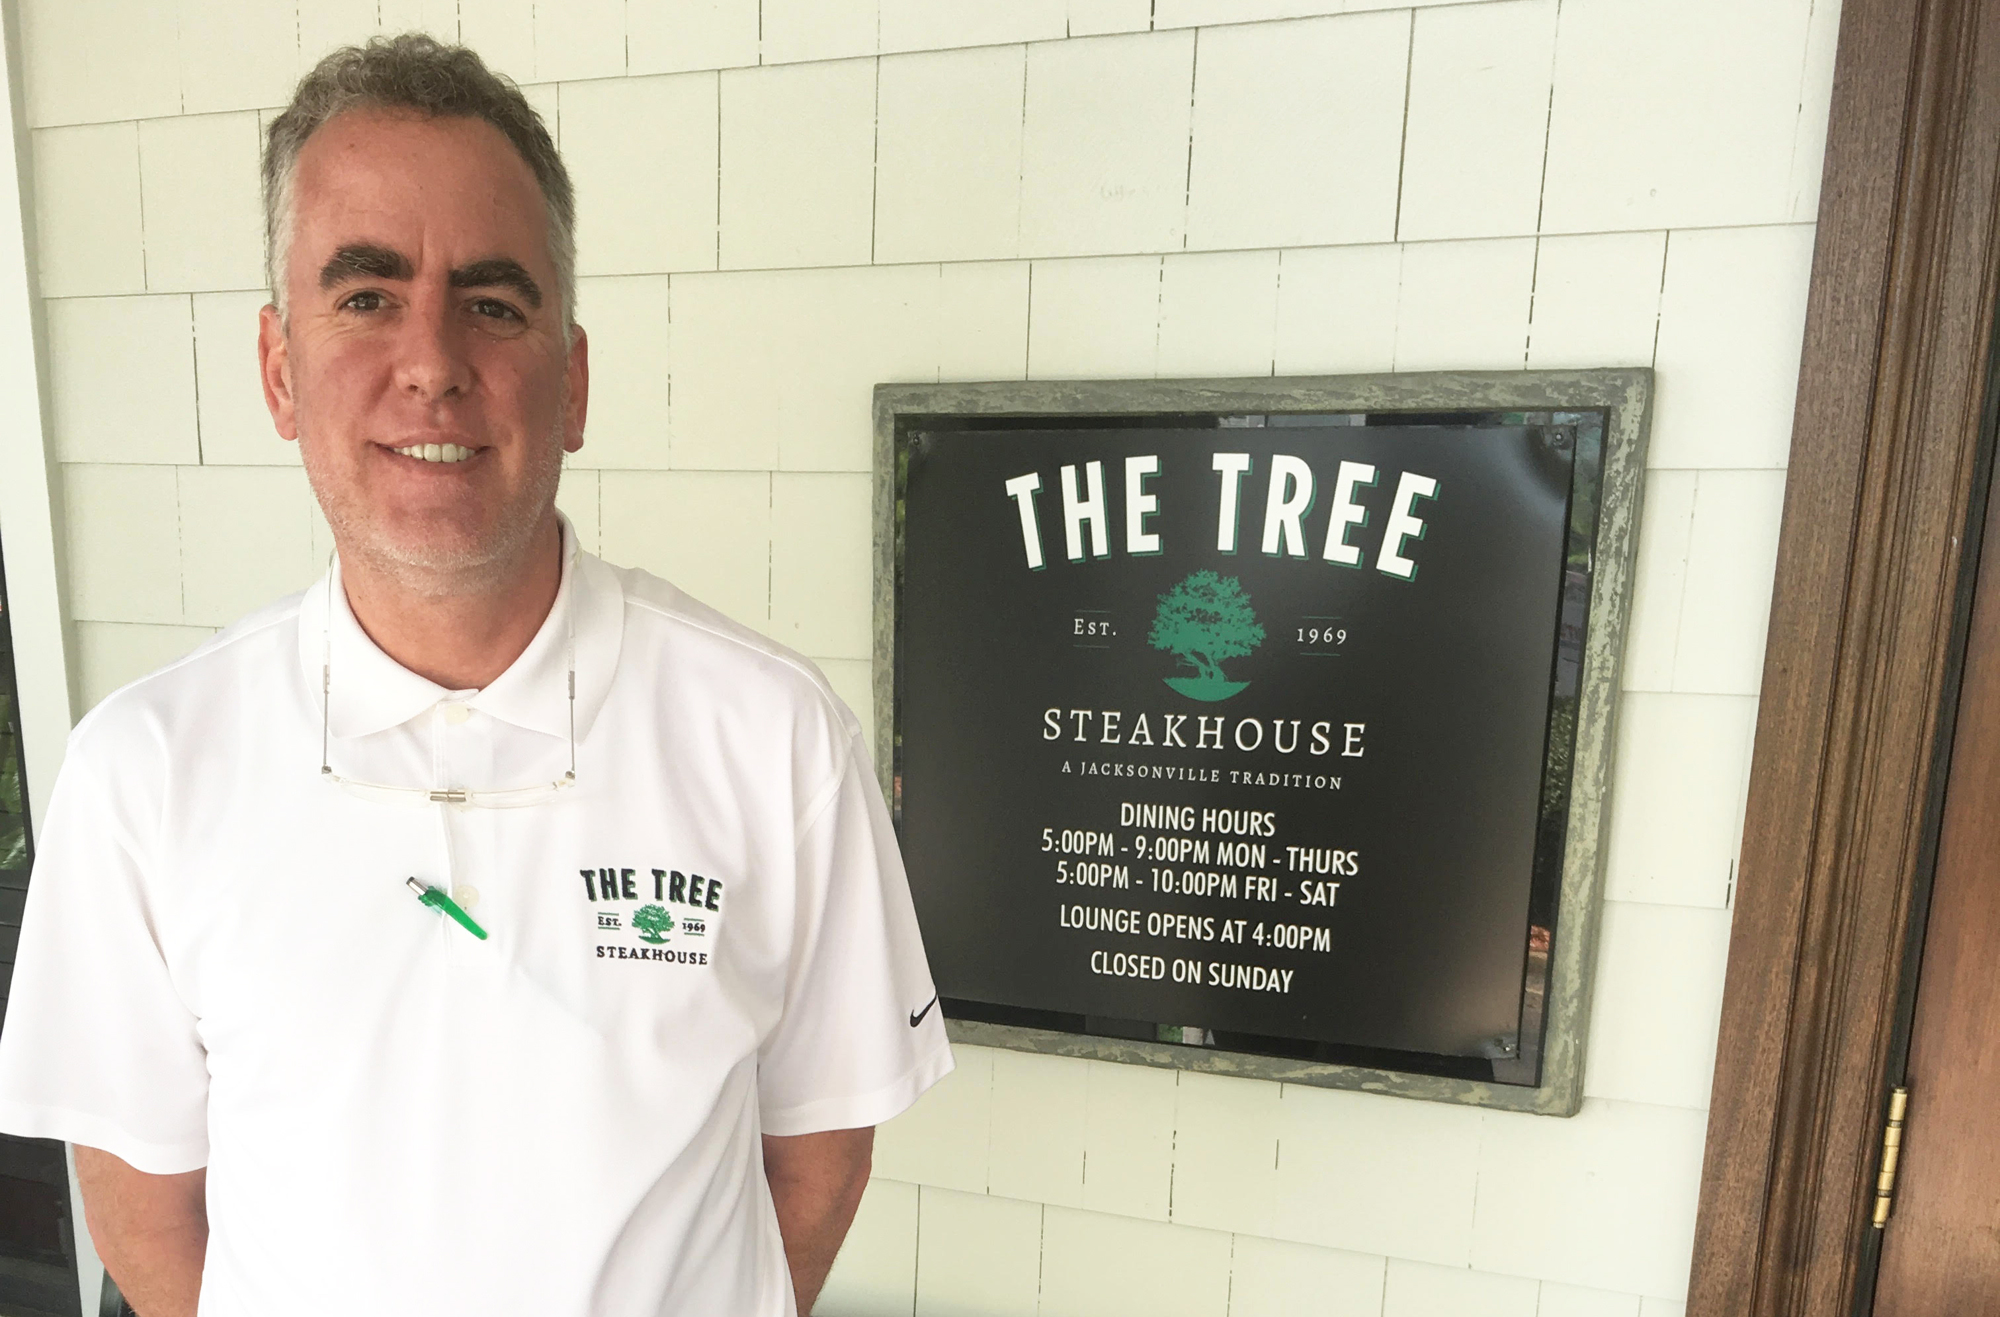 Joe Foster, The Tree Steakhouse managing partner and executive chef, began his career as a teenage busboy at the restaurant.